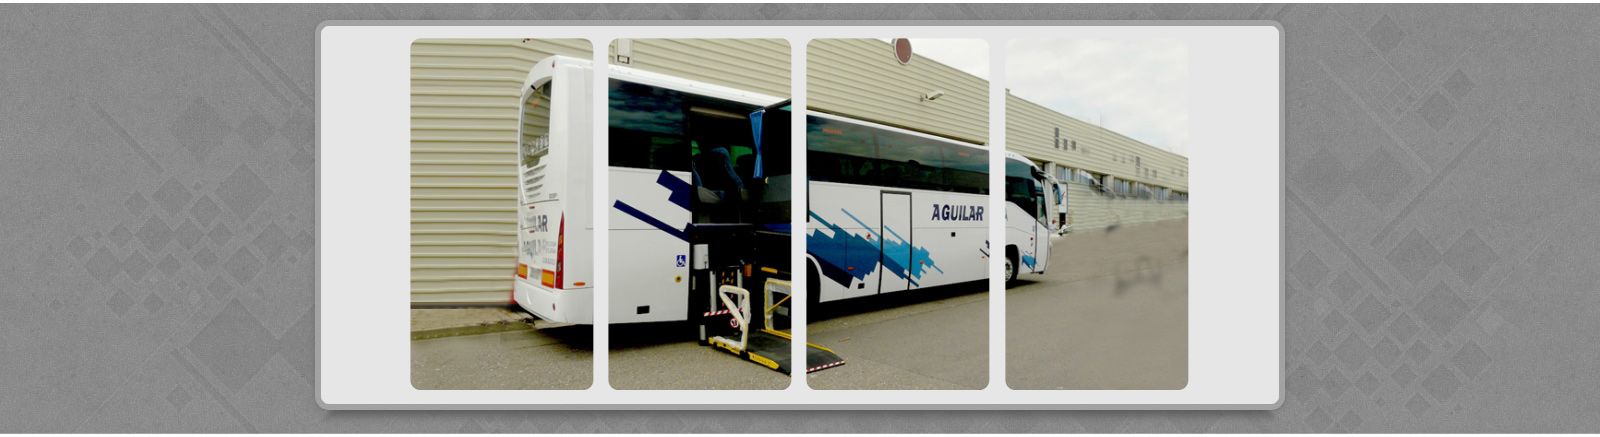 Autobuses Aguilar banner2